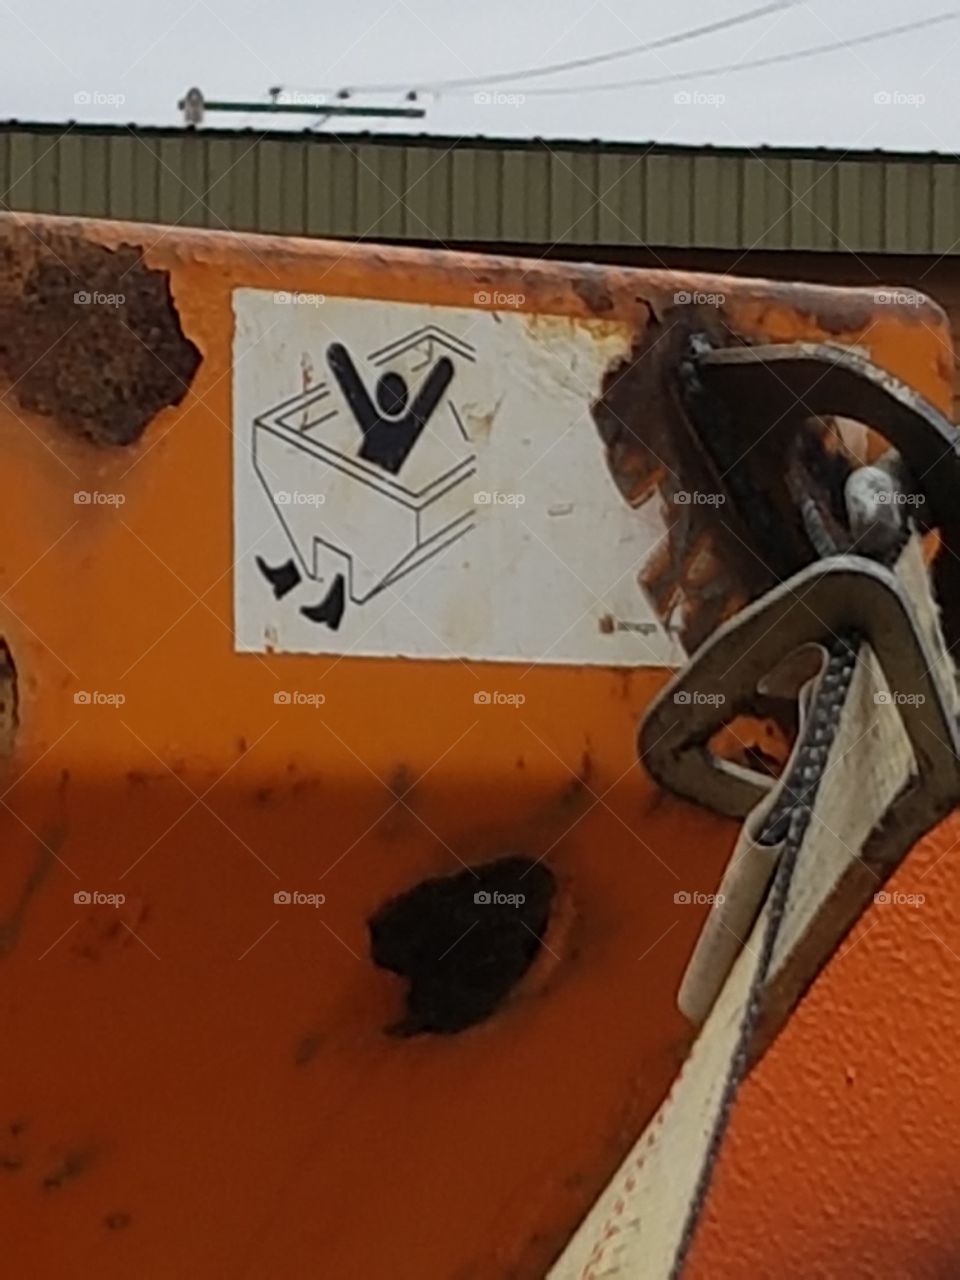 This was on the side of a construction vehicle